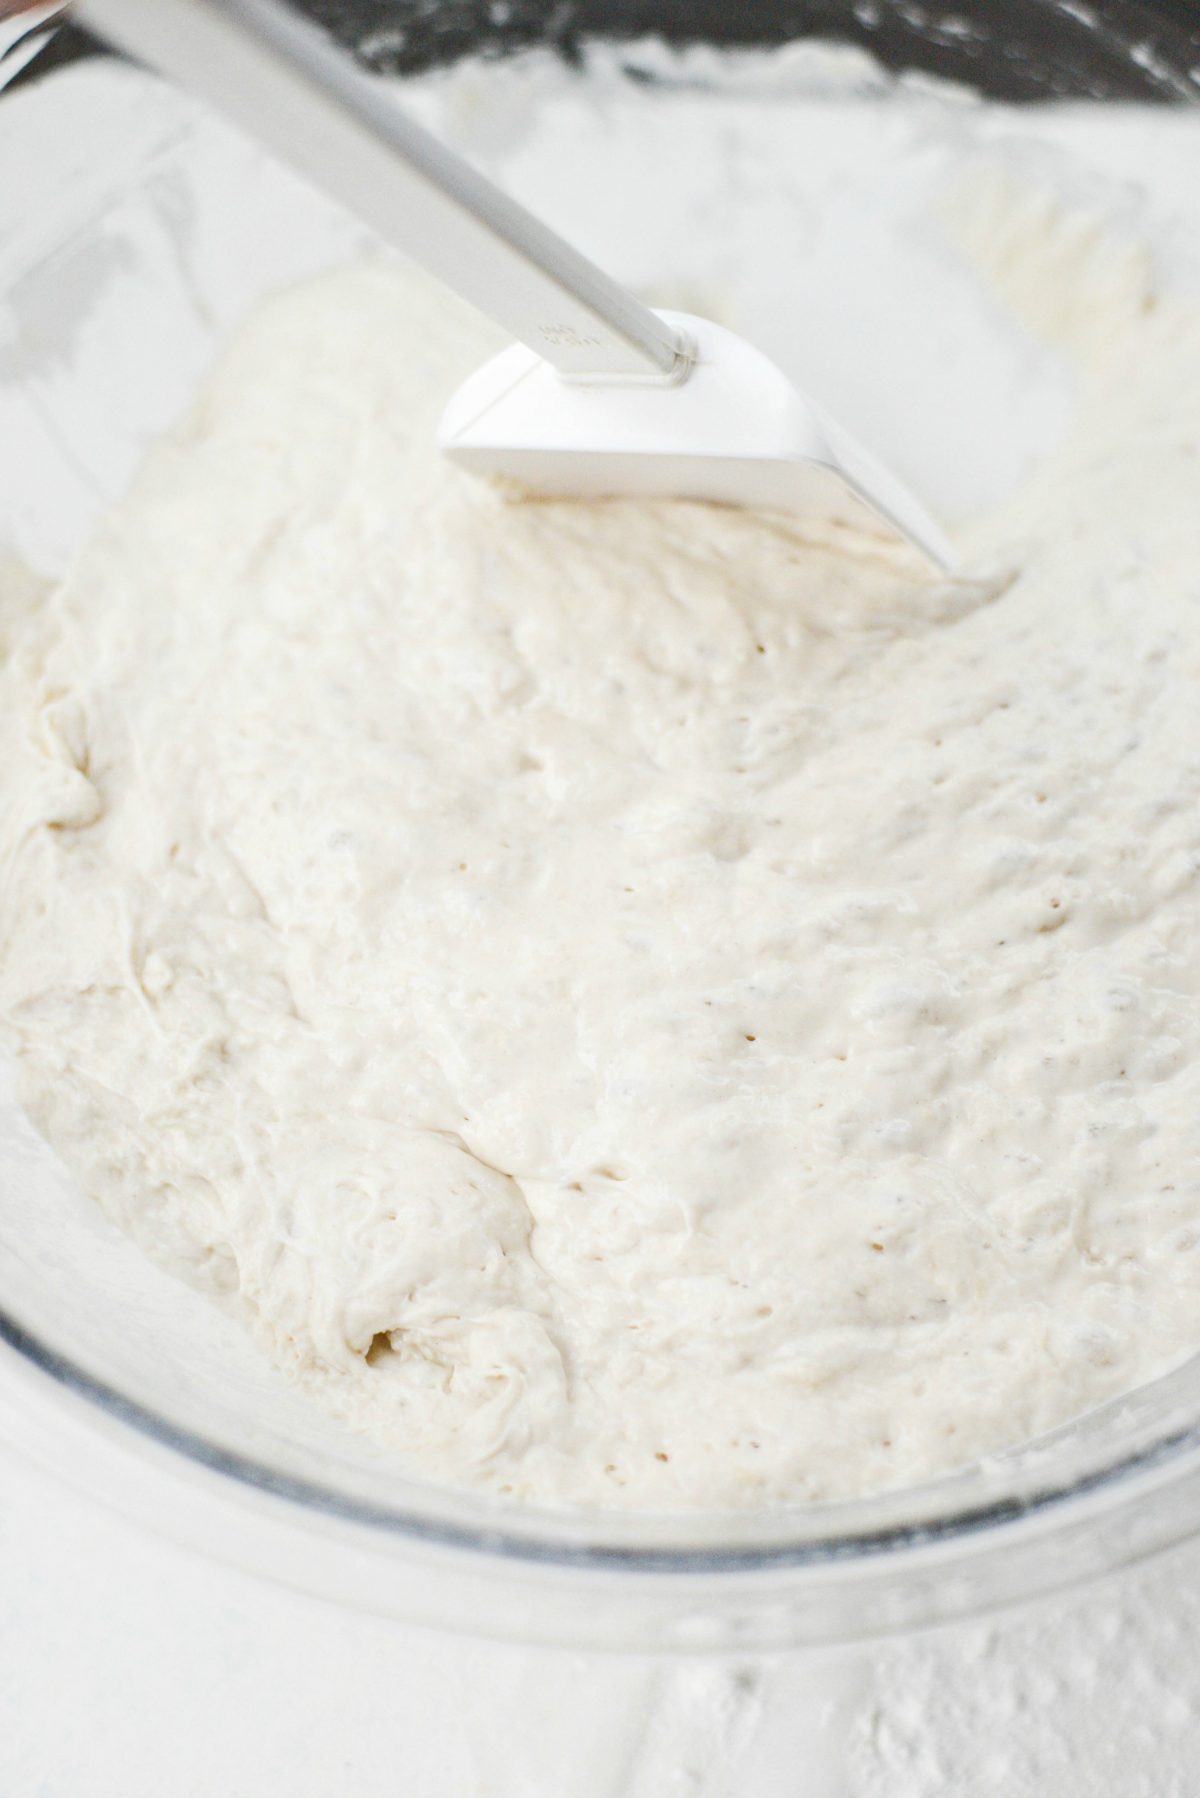 use a spatula to loosen the edges of the dough from the bowl.